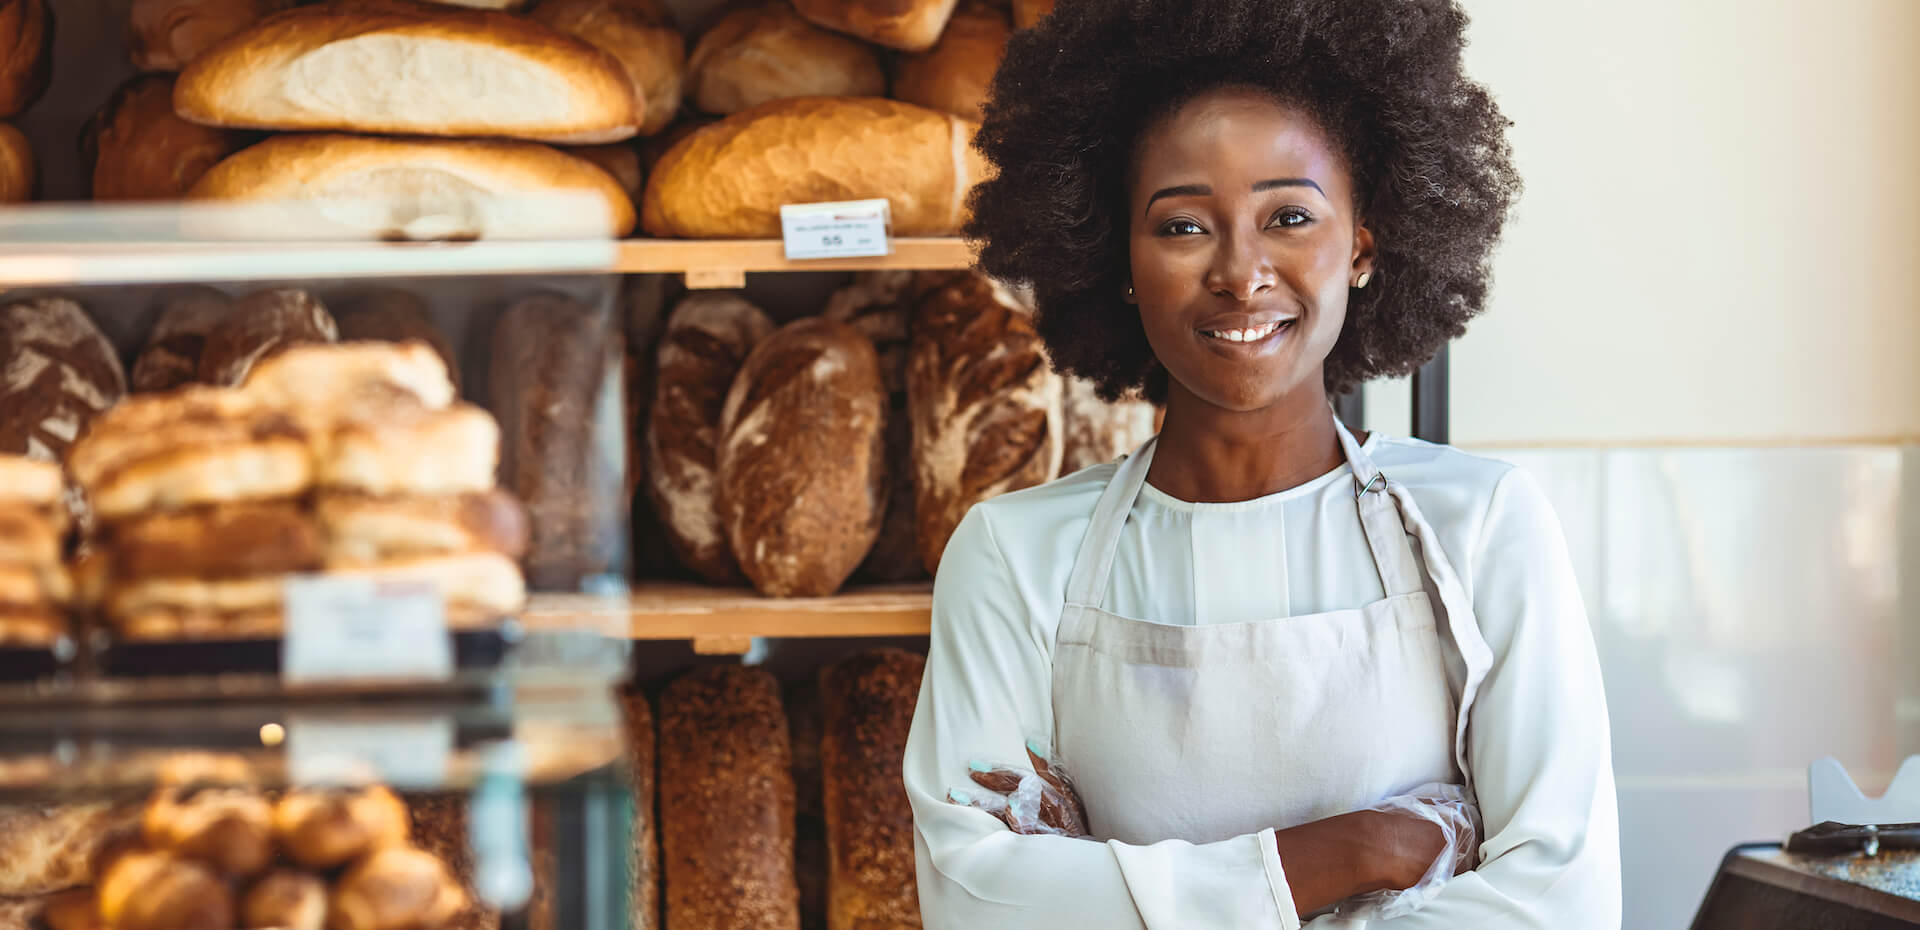 Confident African American baker posing in her bakery showing confidence in vision after laser eye surgery.